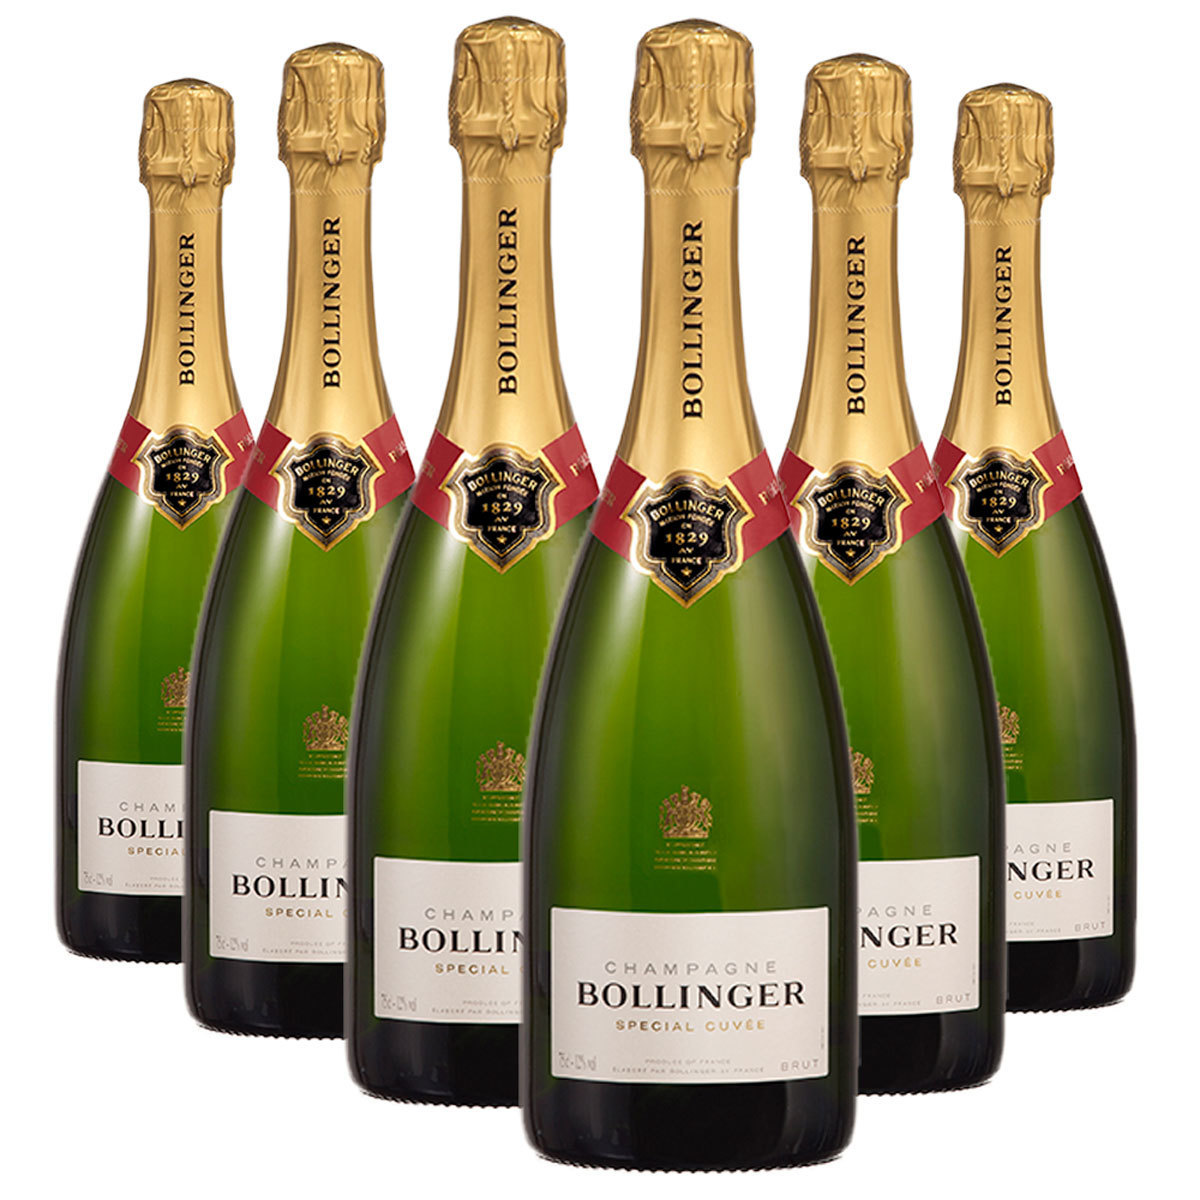 Bollinger Special Cuvée NV Champagne, 6 x 75cl with Gift Box